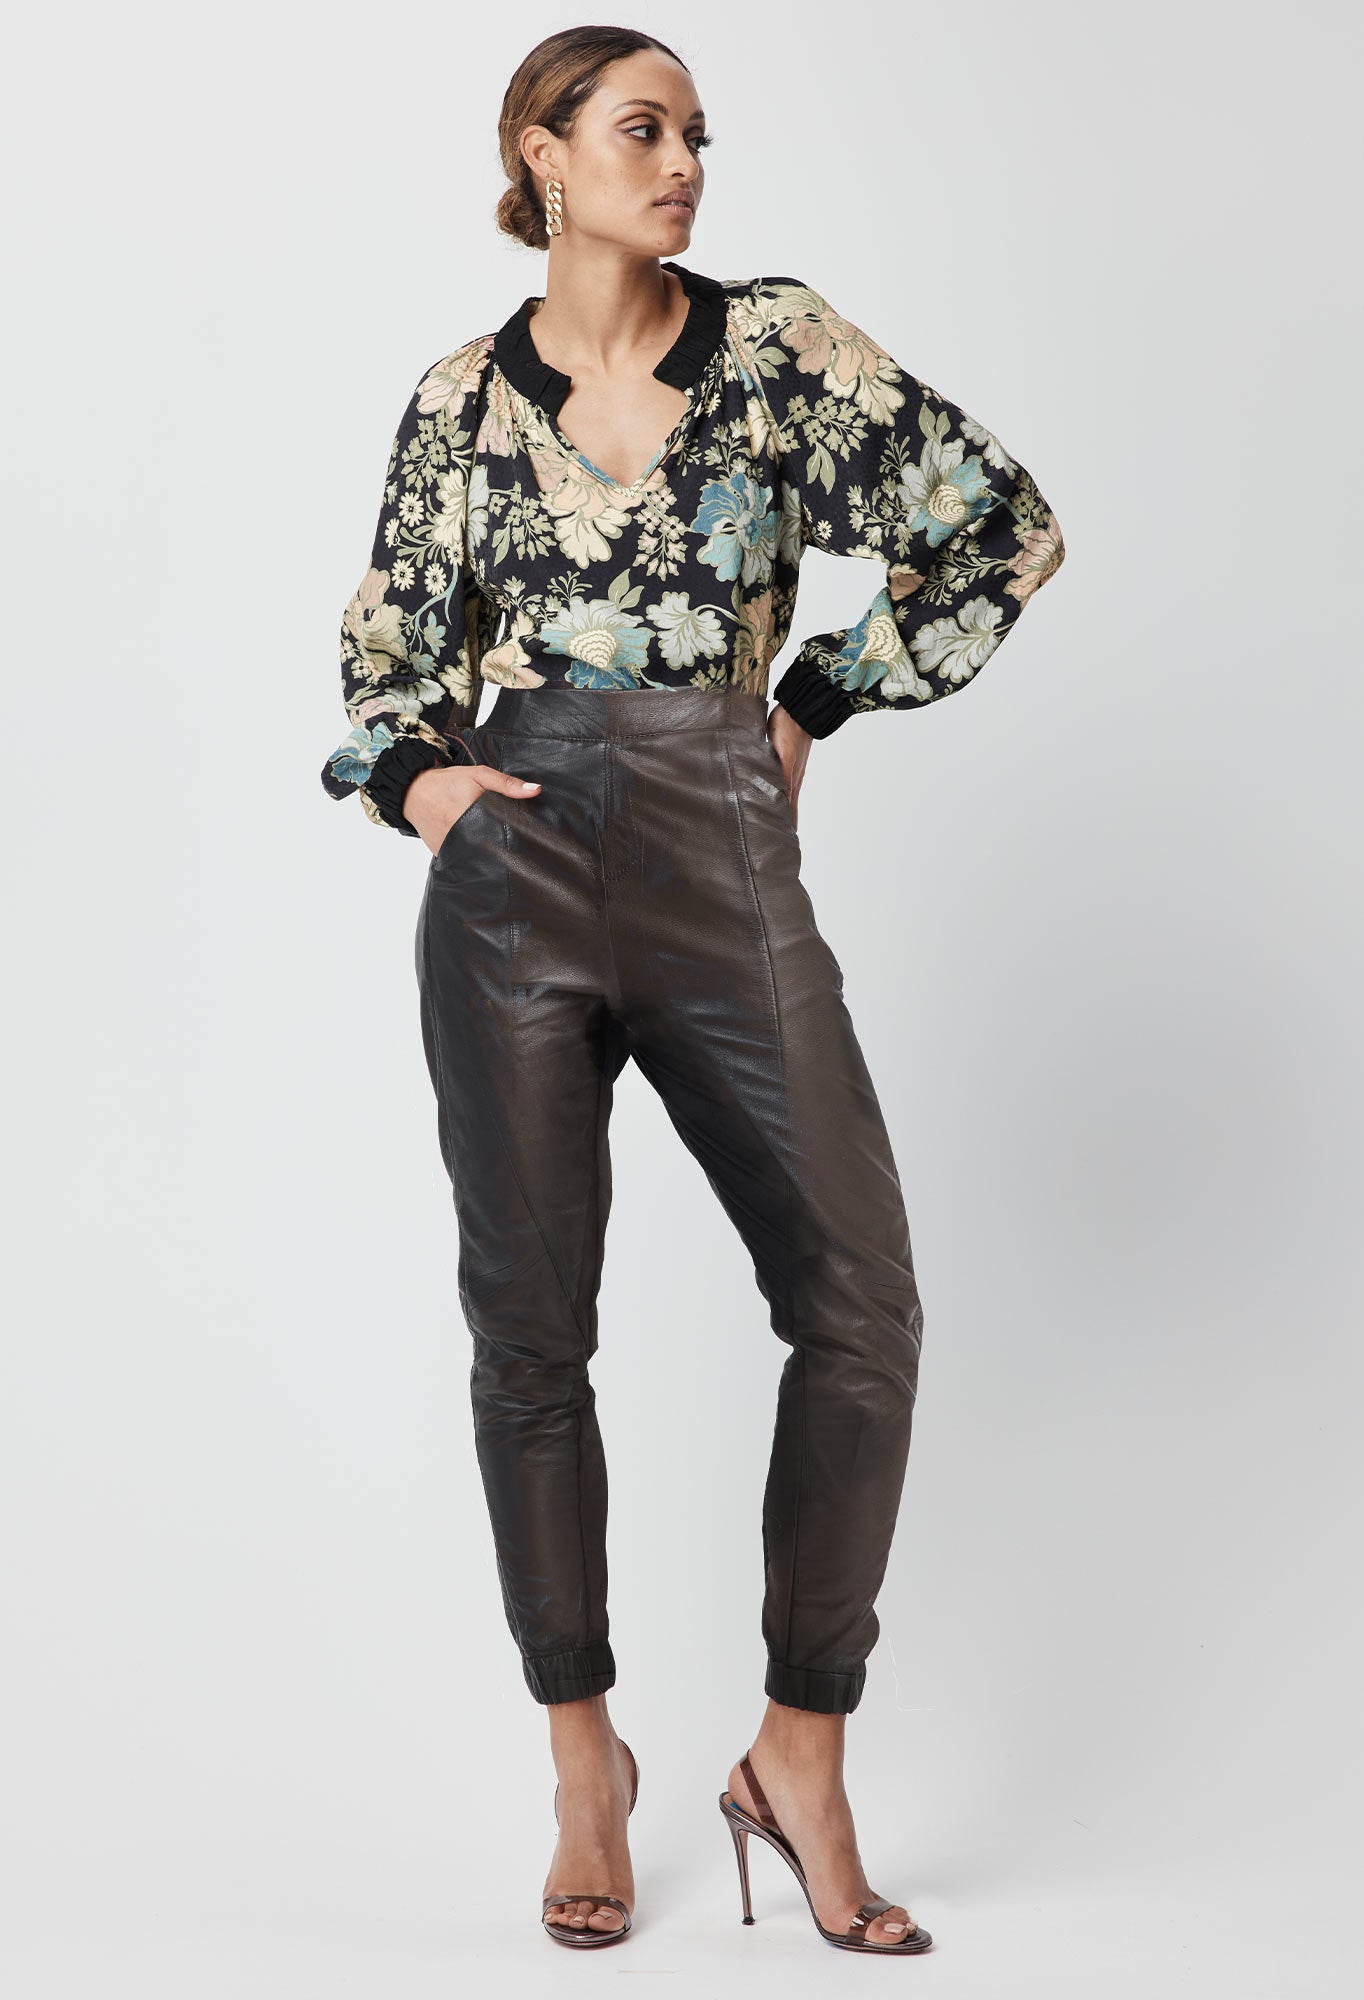 Farrah Leather Pant in Chocolate